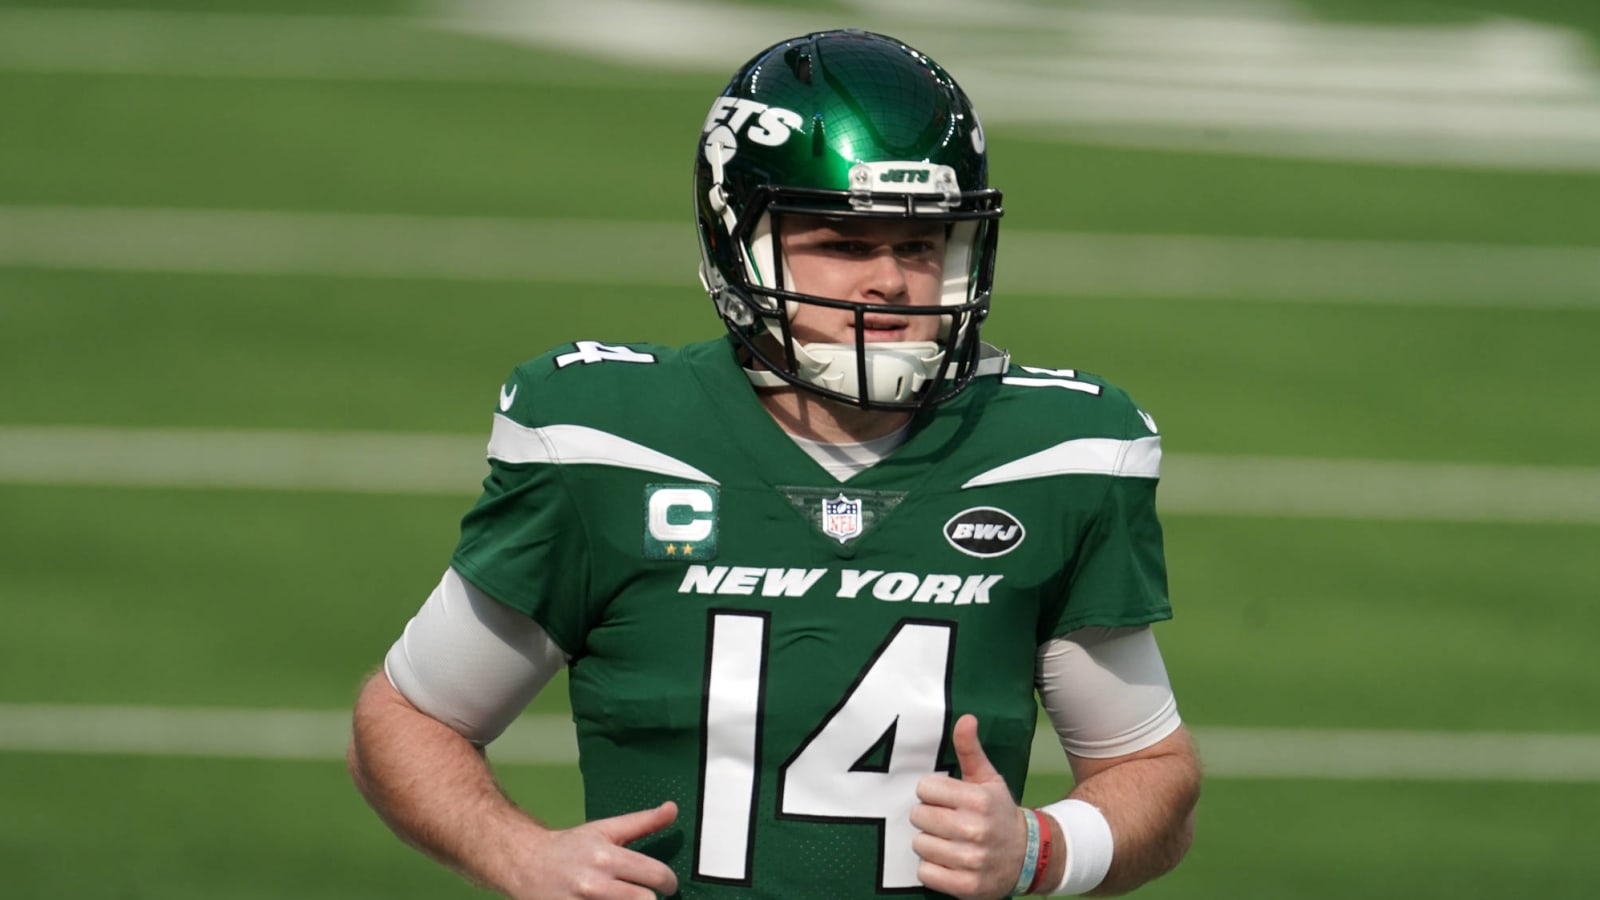 Jets GM Joe Douglas: Our stance on Darnold has not changed